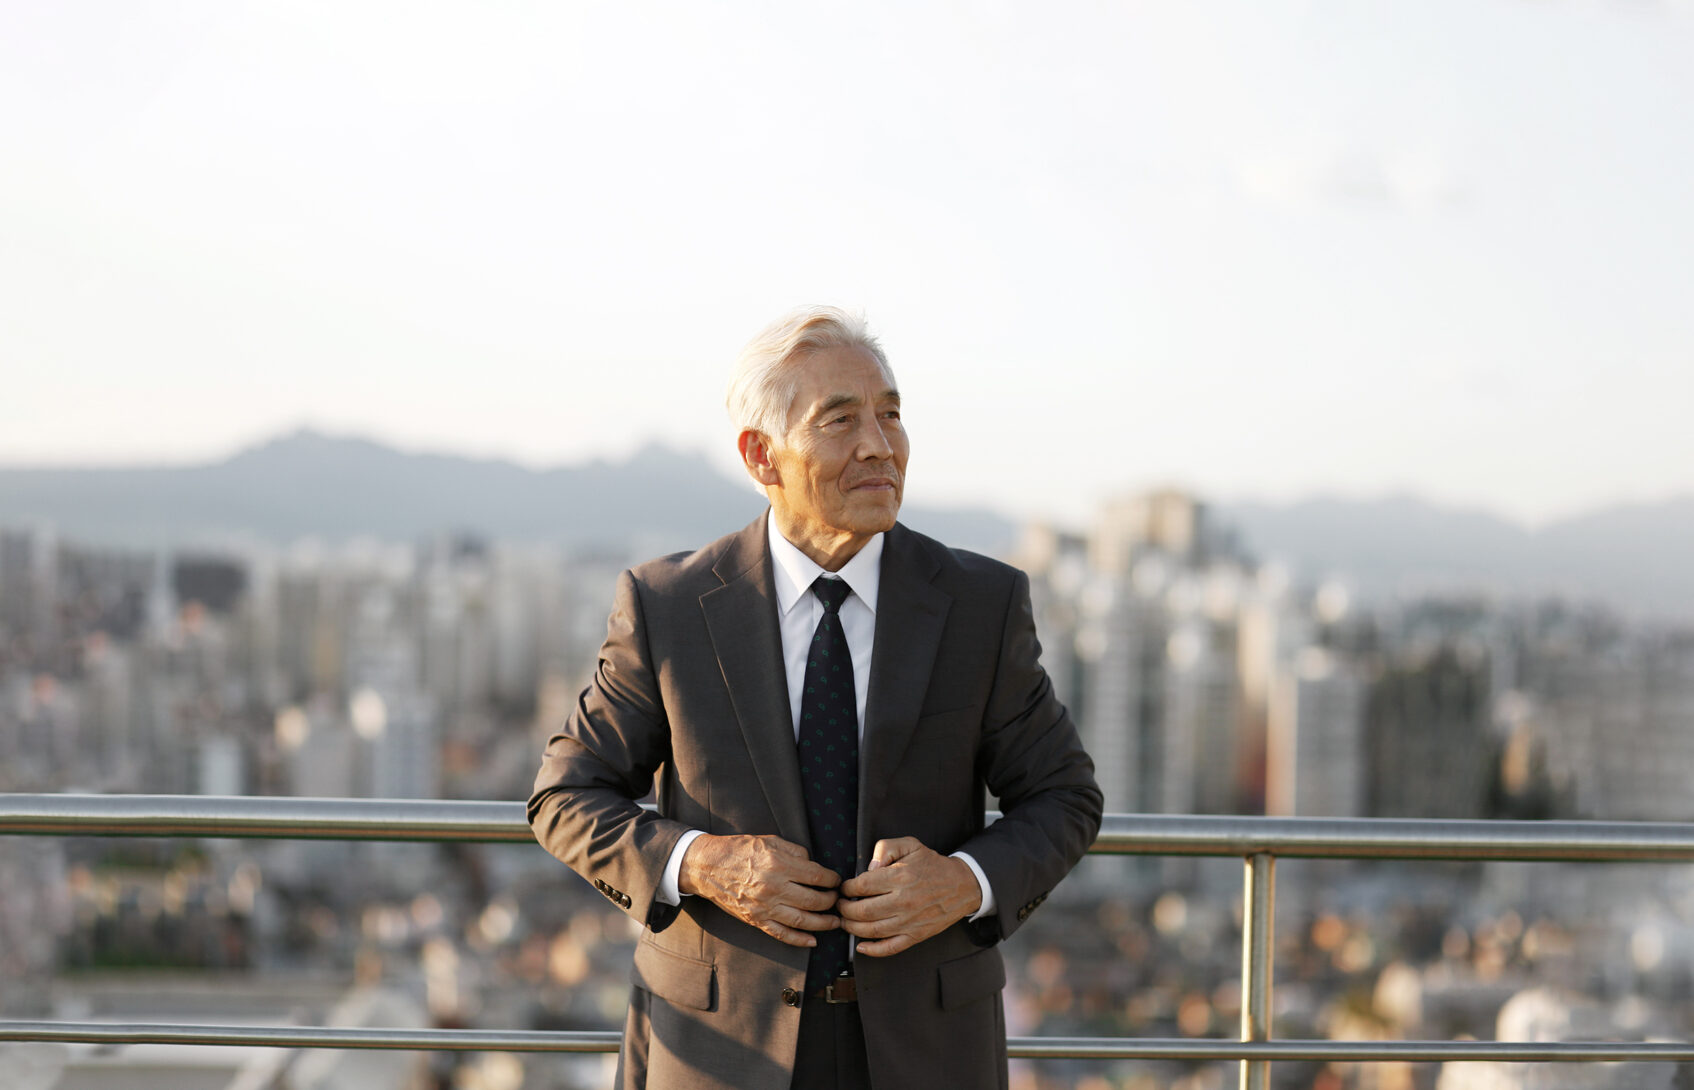 A businessman standing on balcony with city skyline in the background.